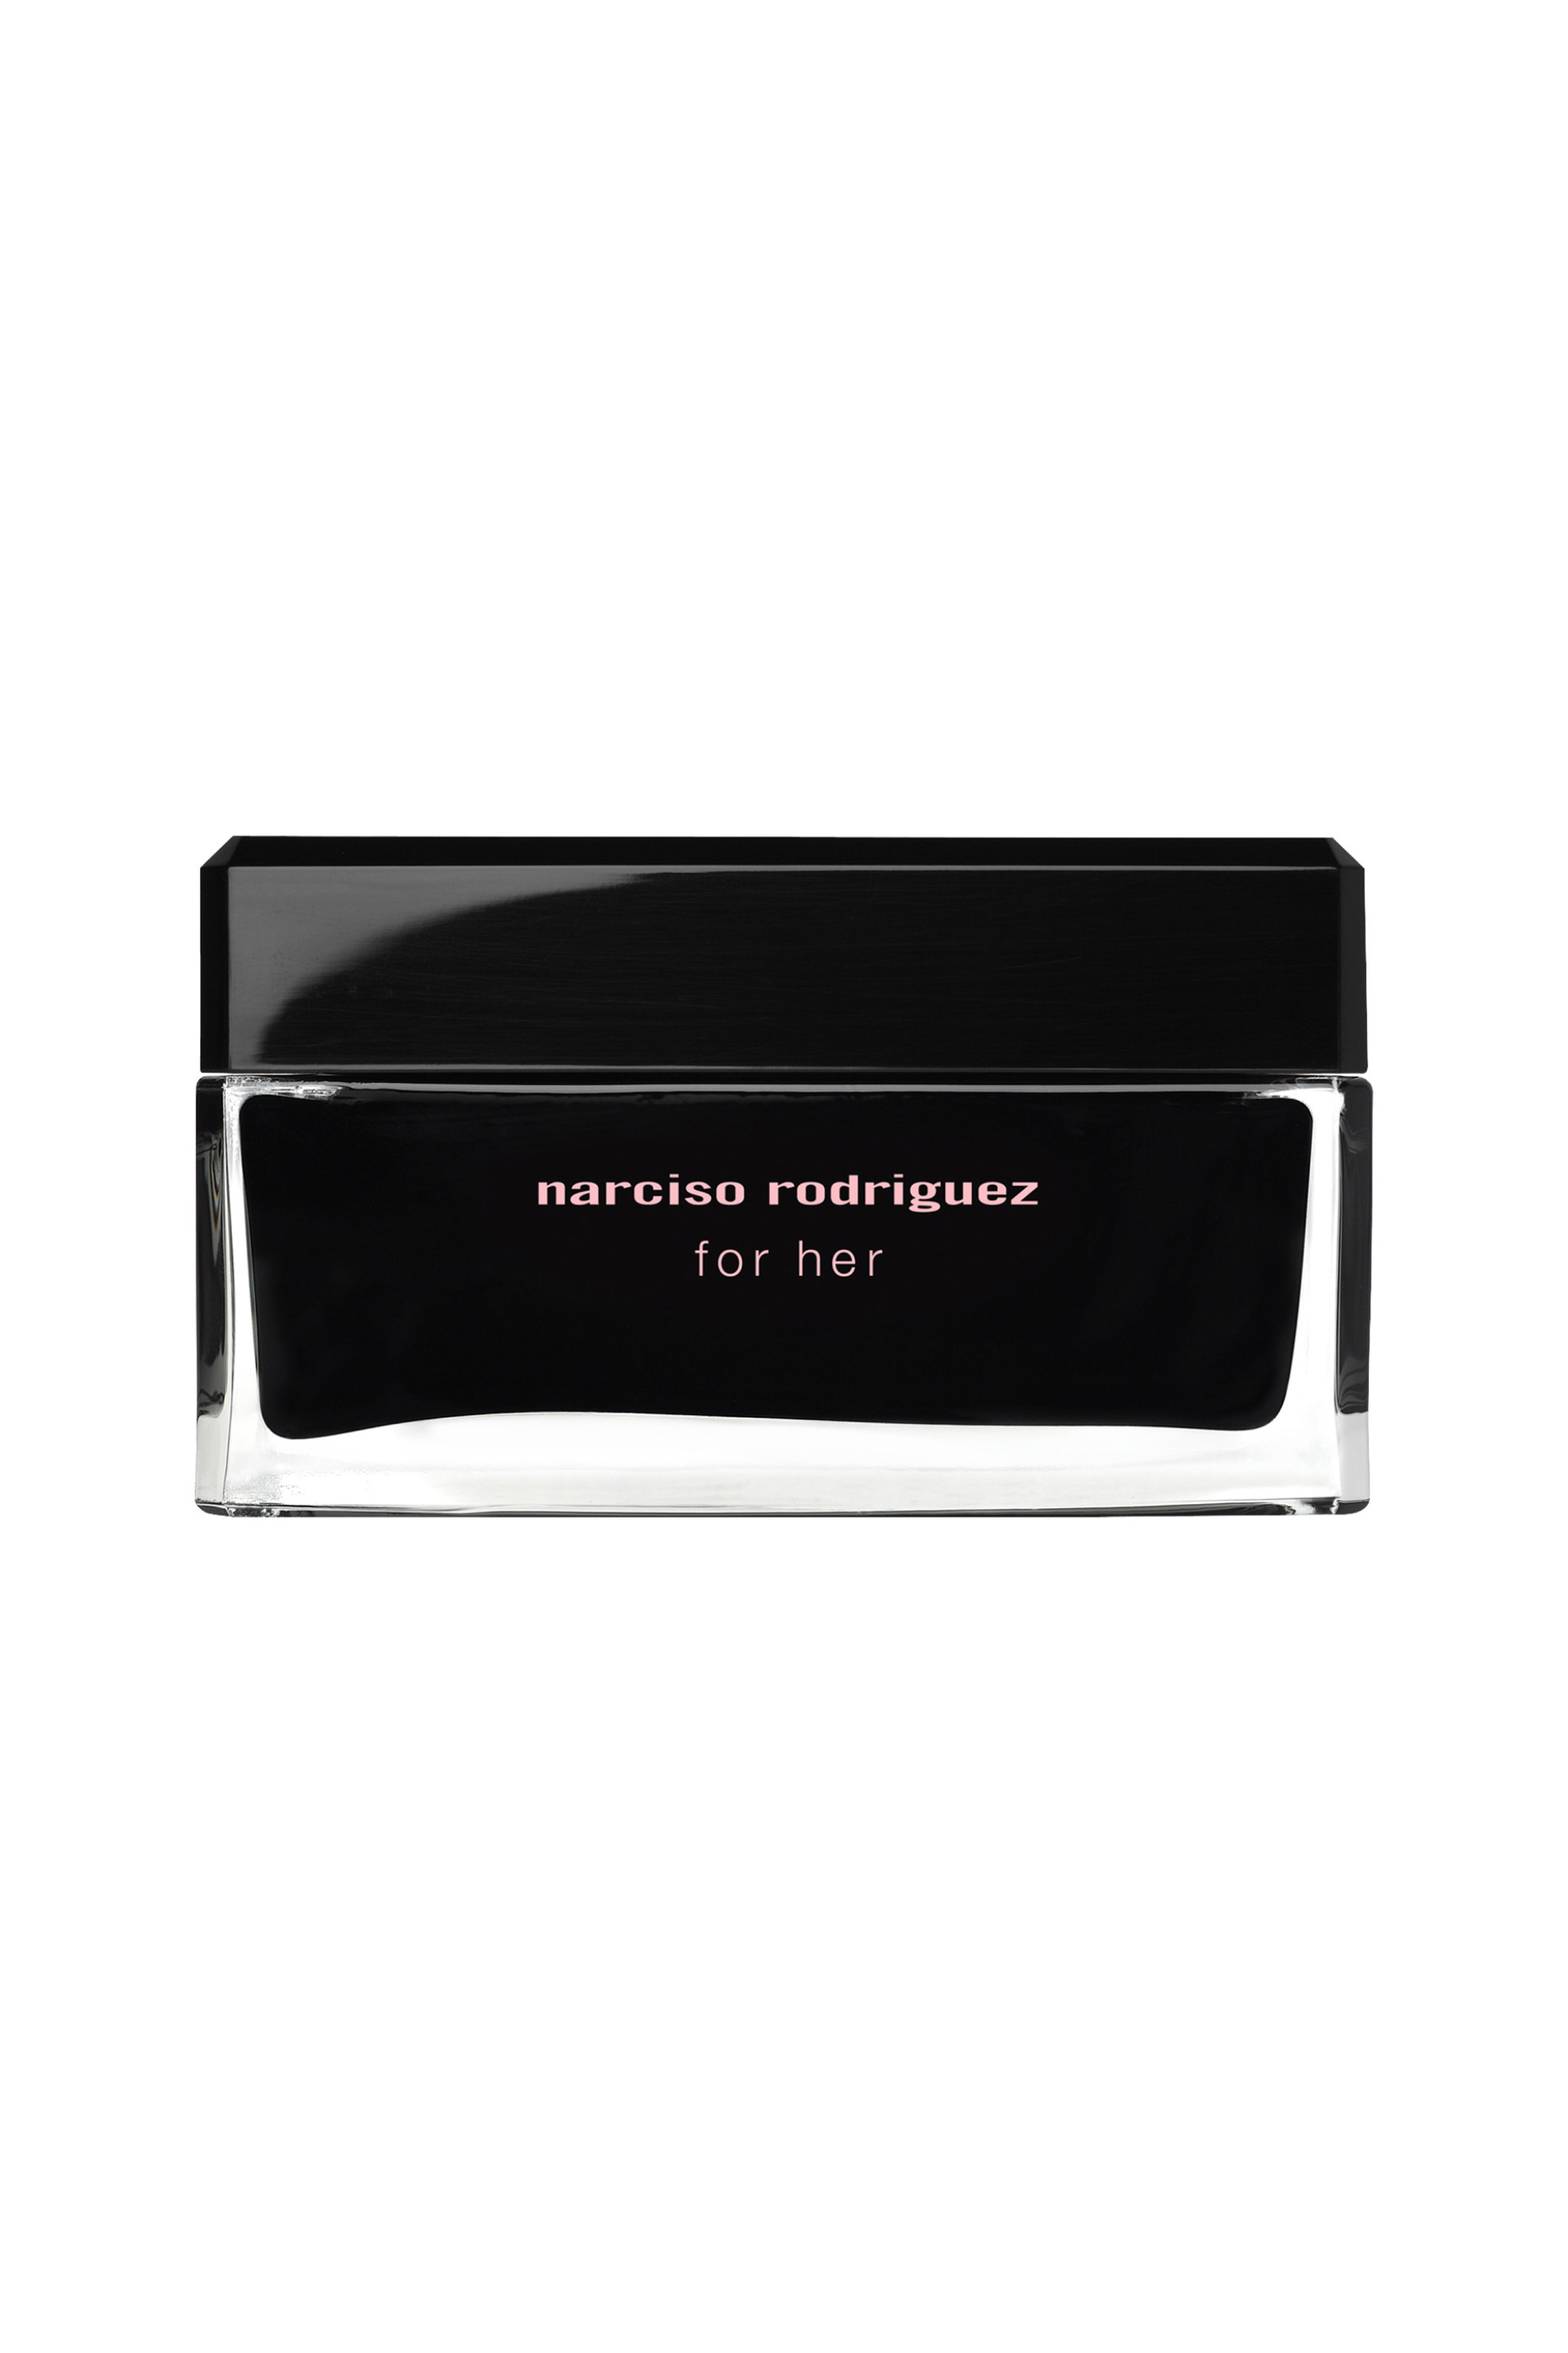 Narciso Rodriguez For Her Body Cream 150 ml - 8900750 1030007